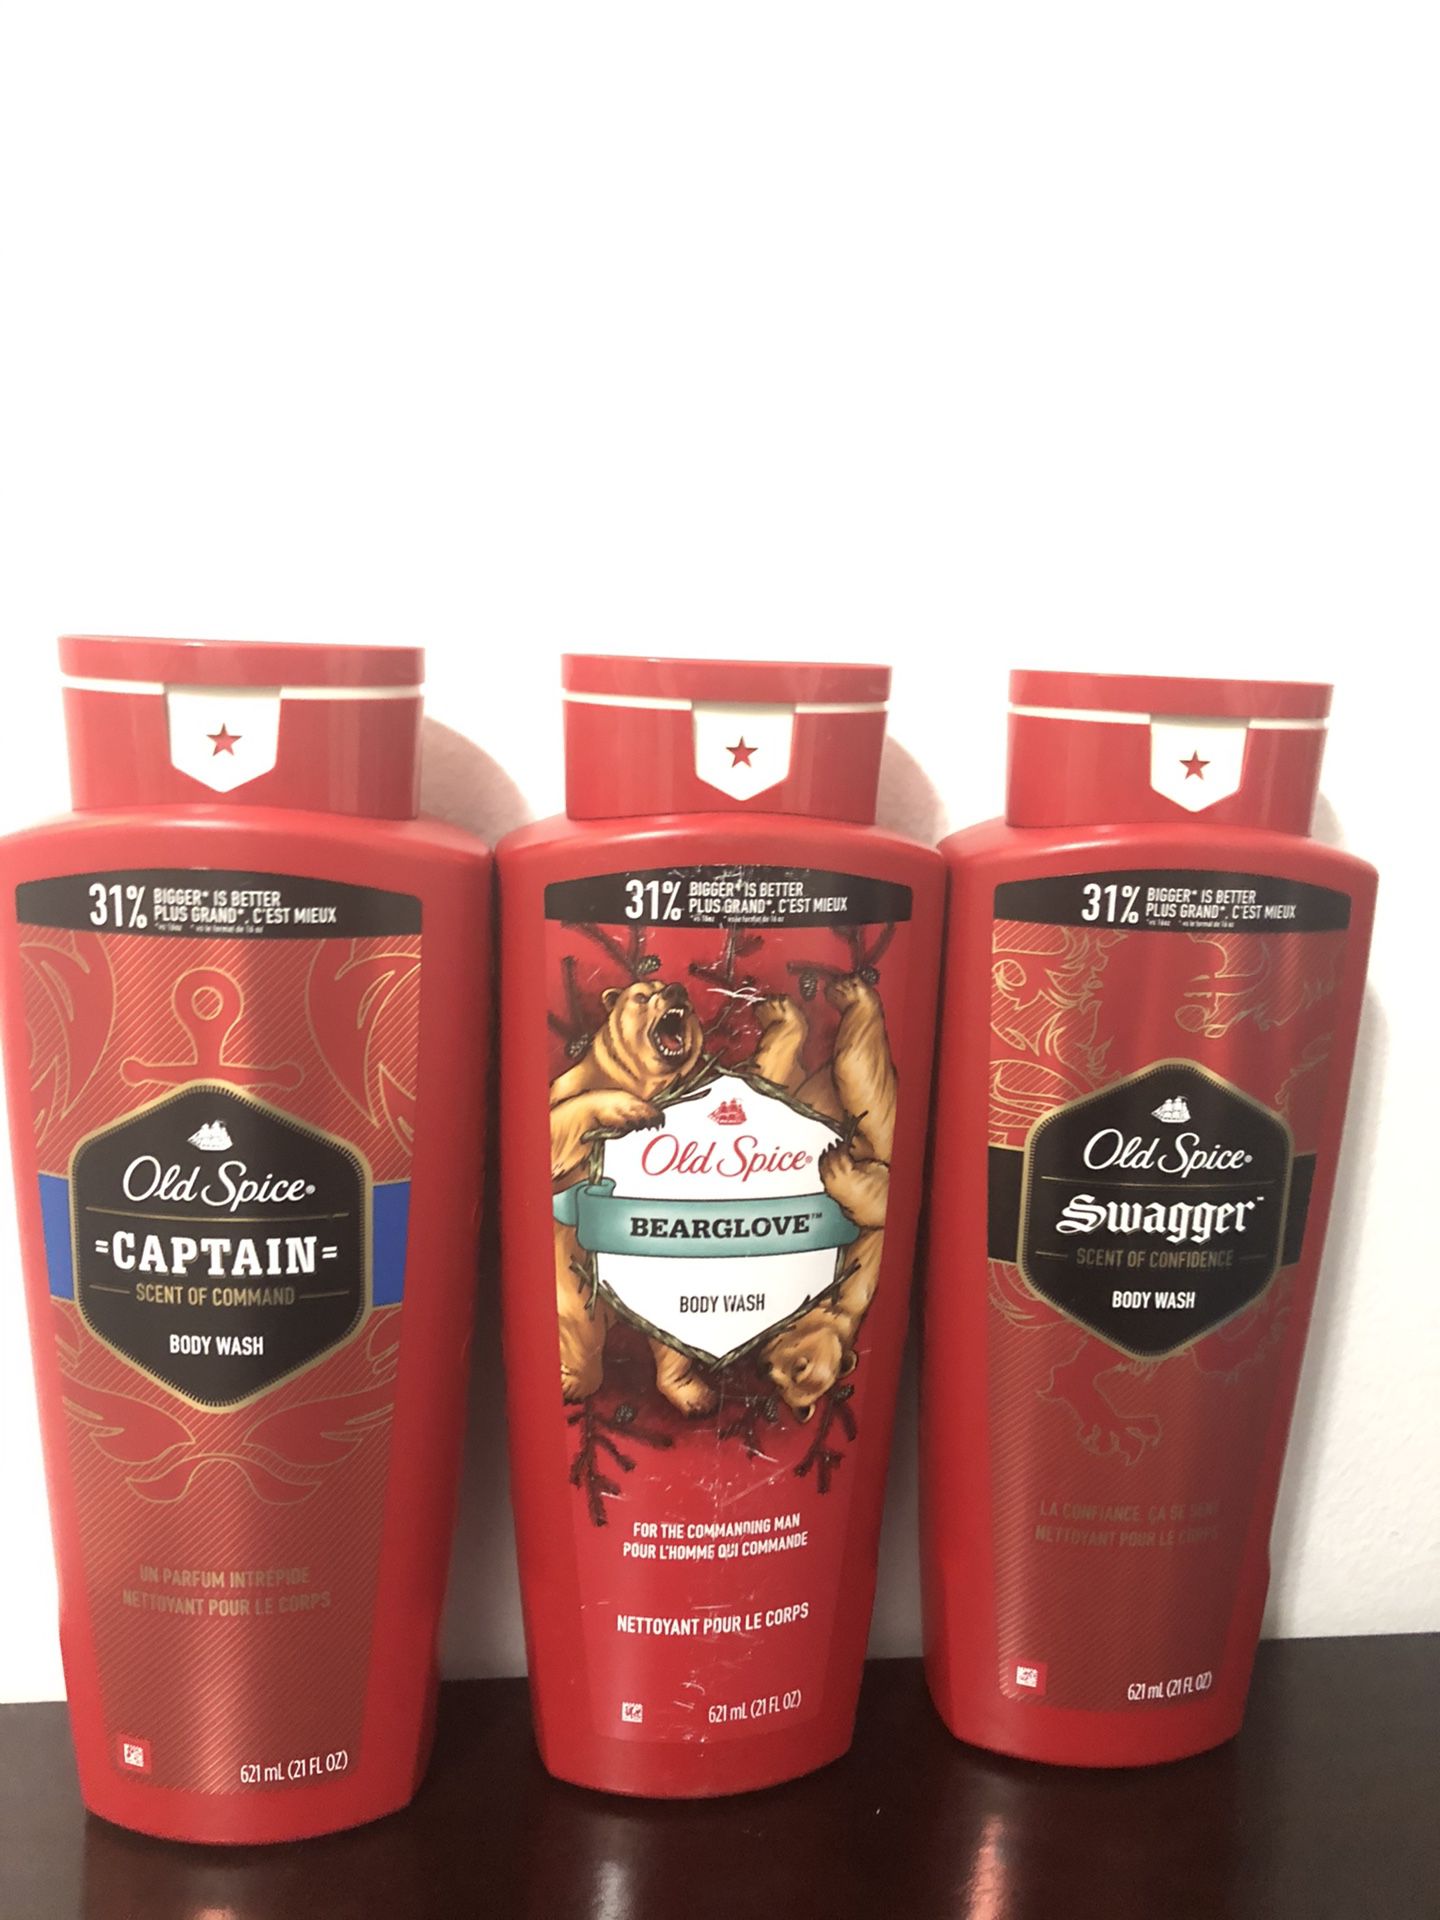 Old spice swagger body wash $4 each